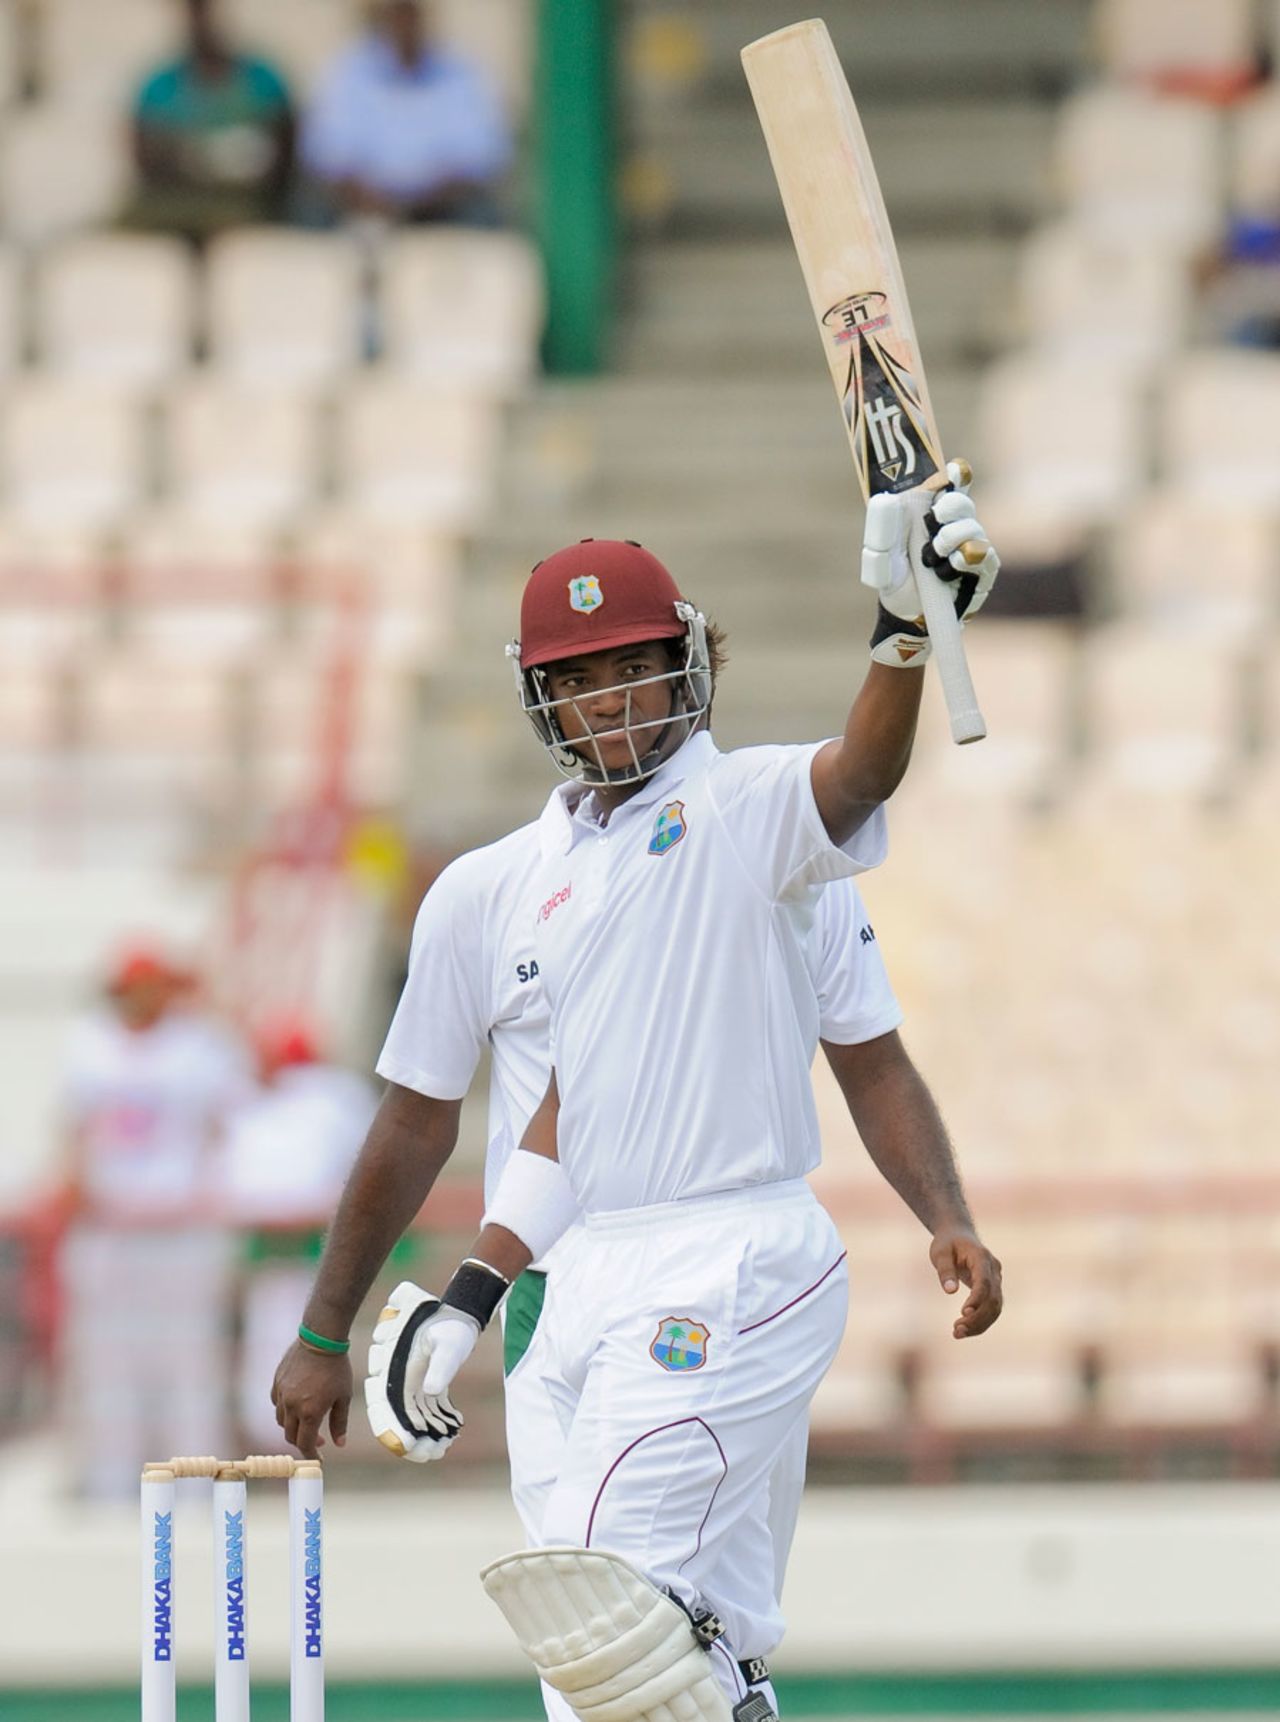 Leon Johnson acknowledges the crowd after scoring a maiden Test fifty, West Indies v Bangladesh, 2nd Test, St. Lucia, 1st day, September 13, 2014